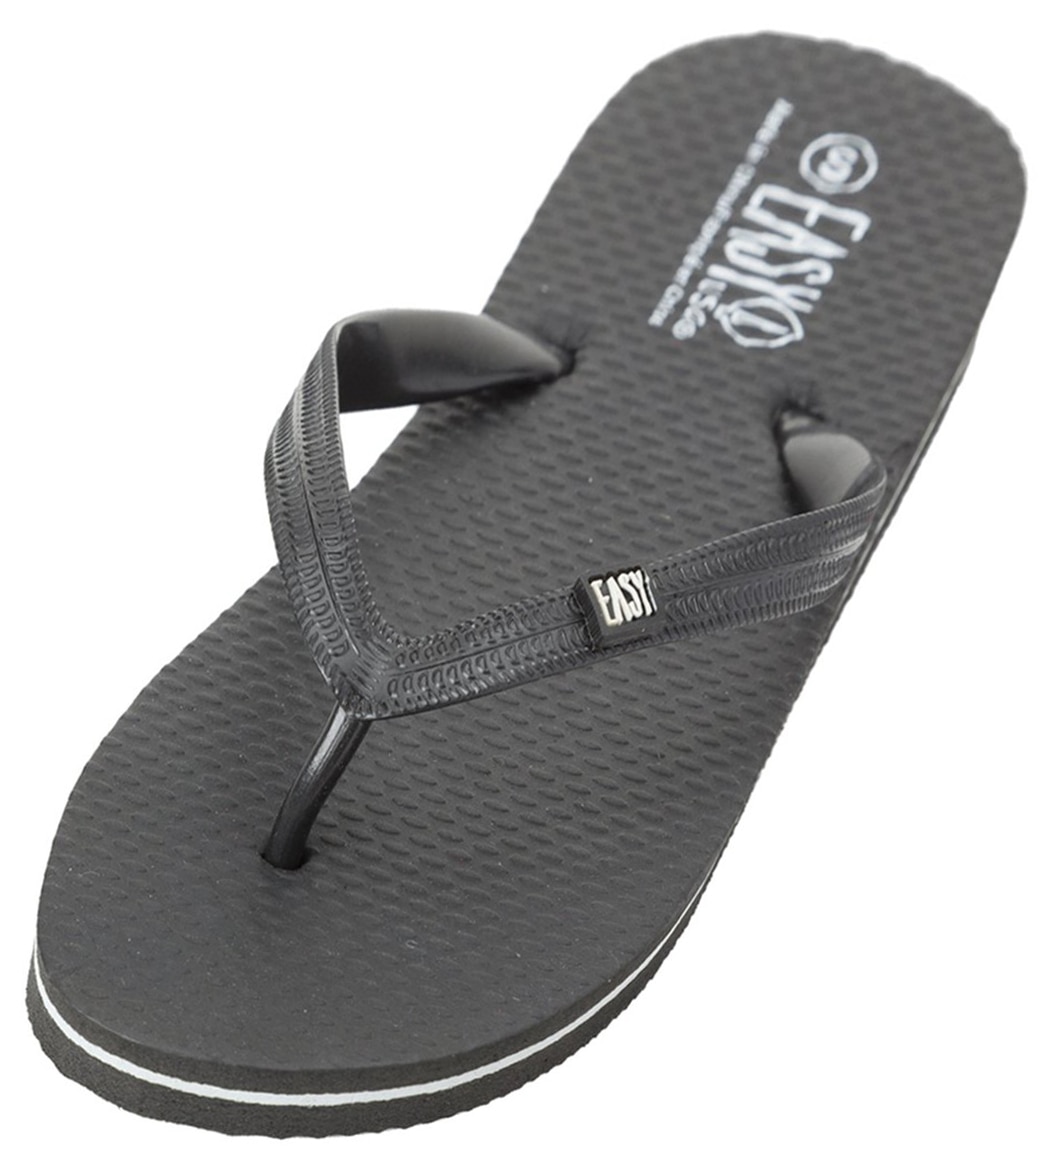 Easy Usa Women's Zory Flip Flop - Black Small Size Small - Swimoutlet.com